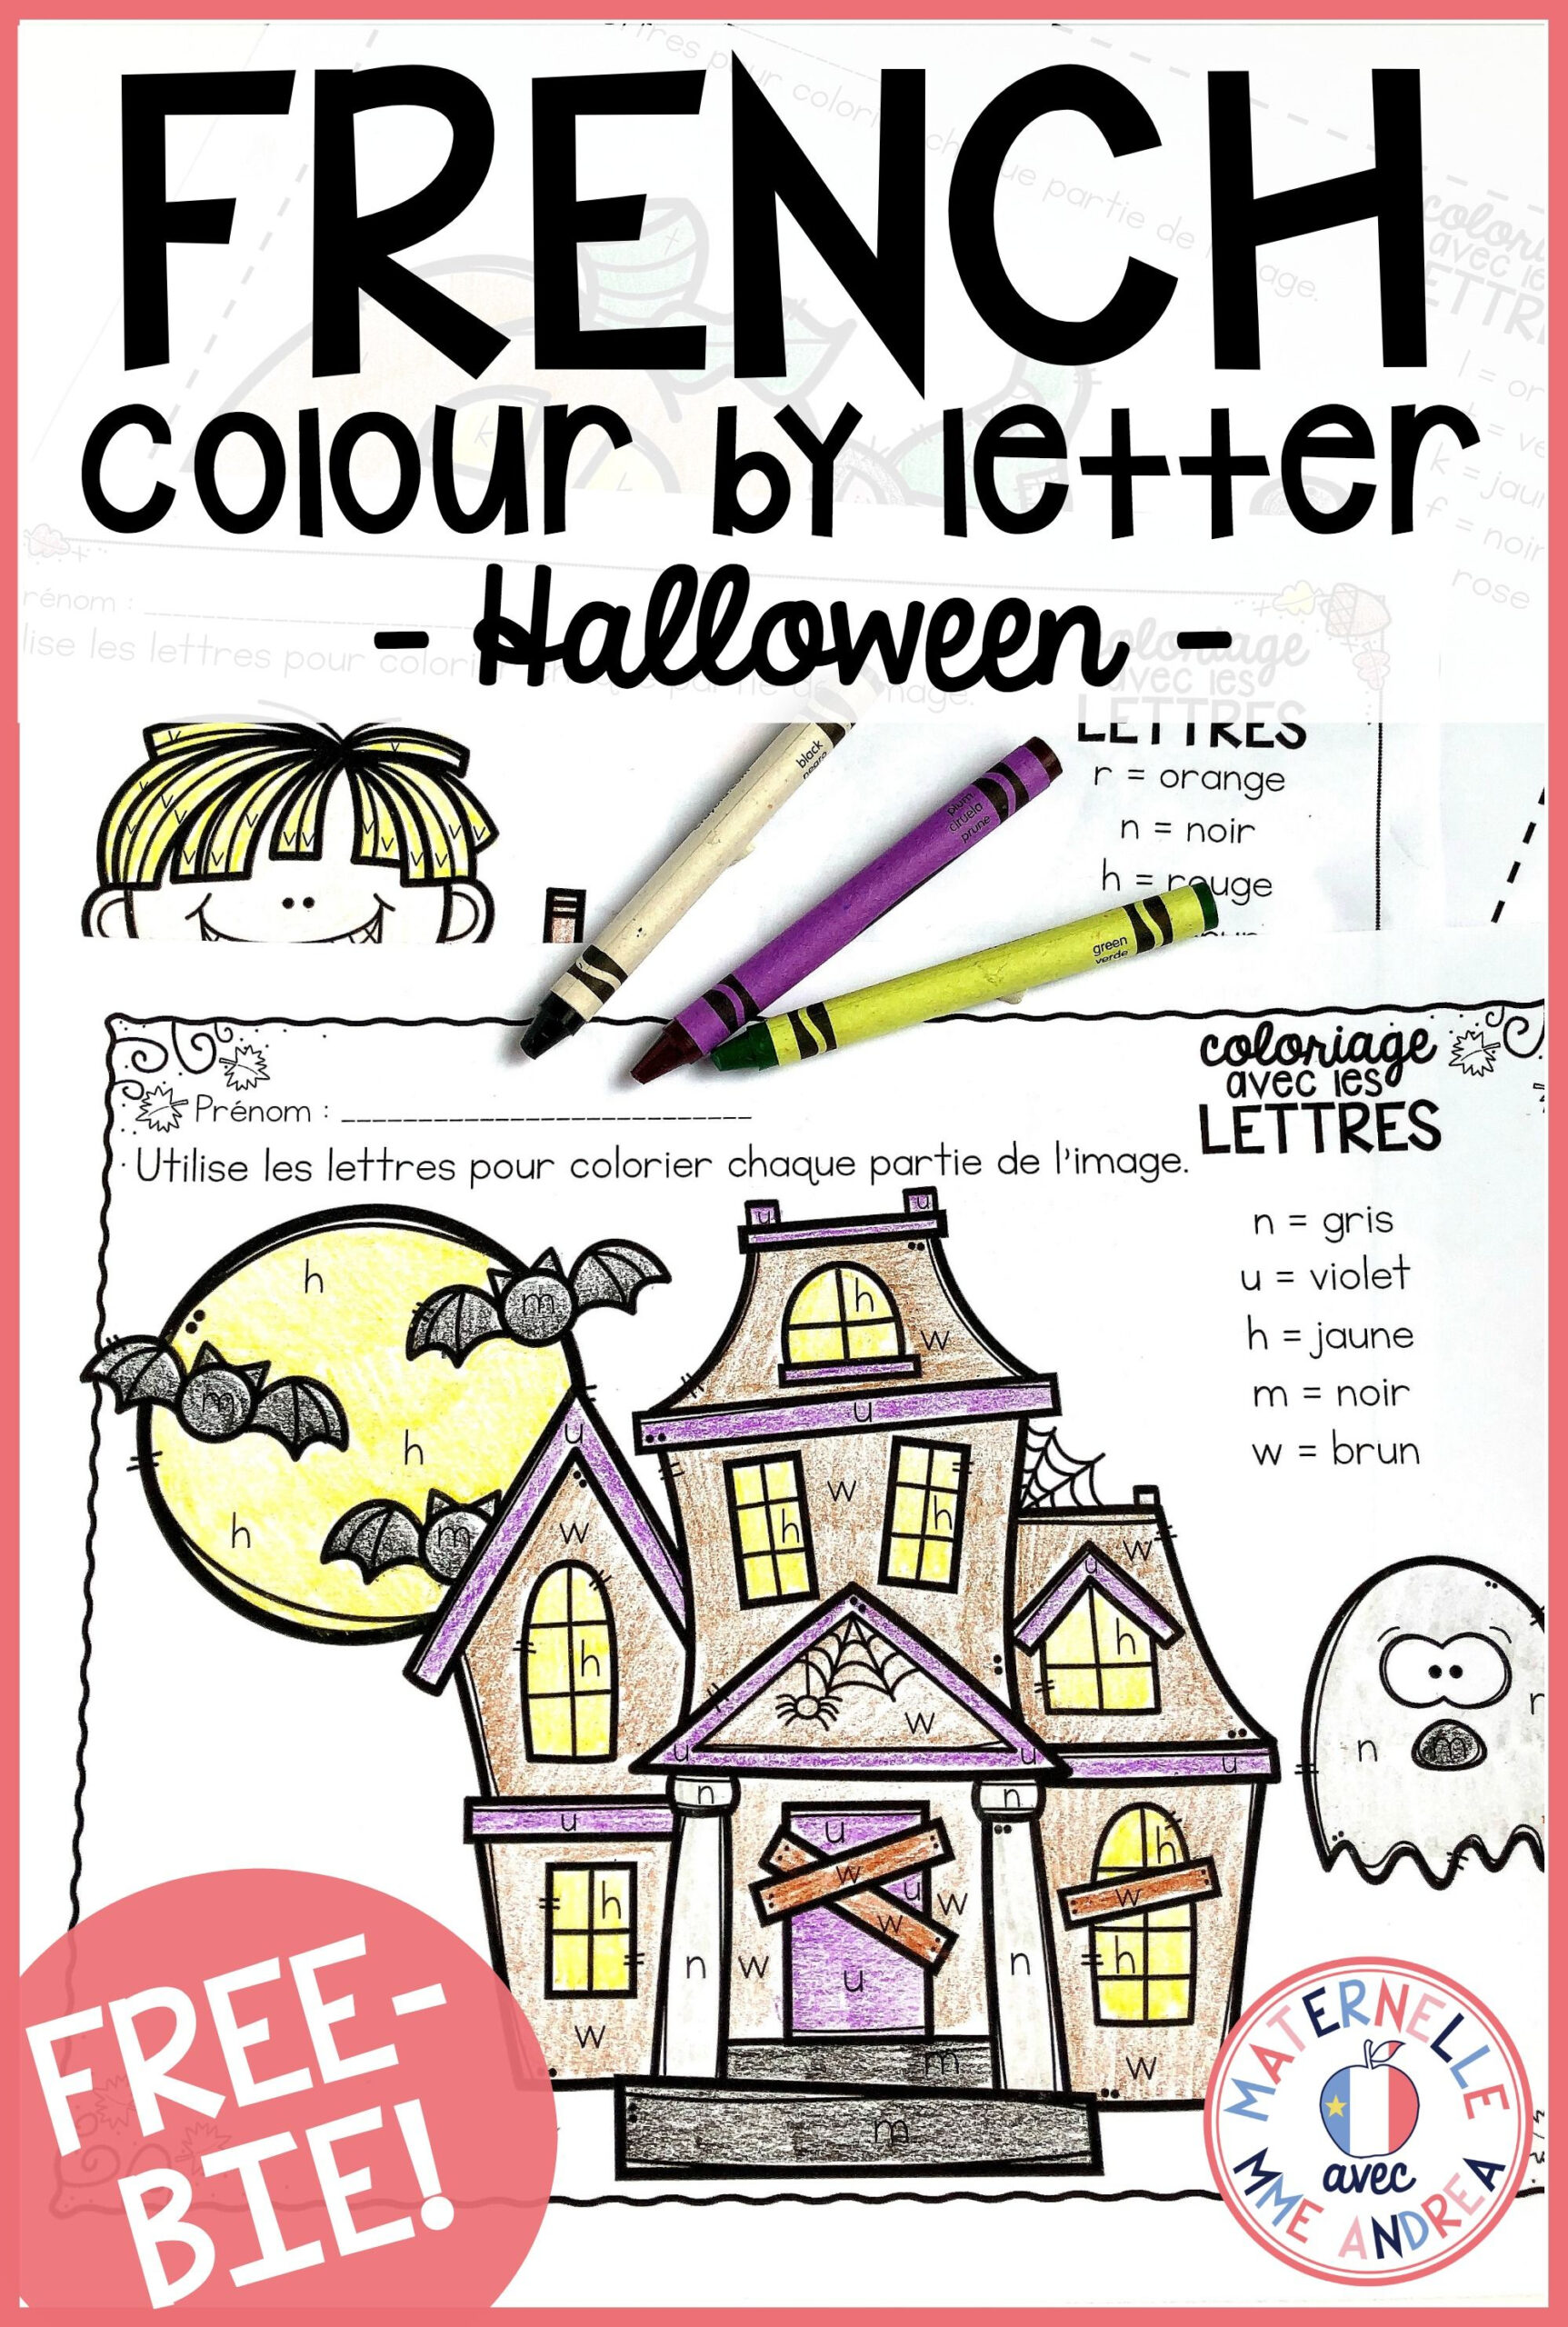 Gratuit! Free French Fall/halloween Colourletter Sheets